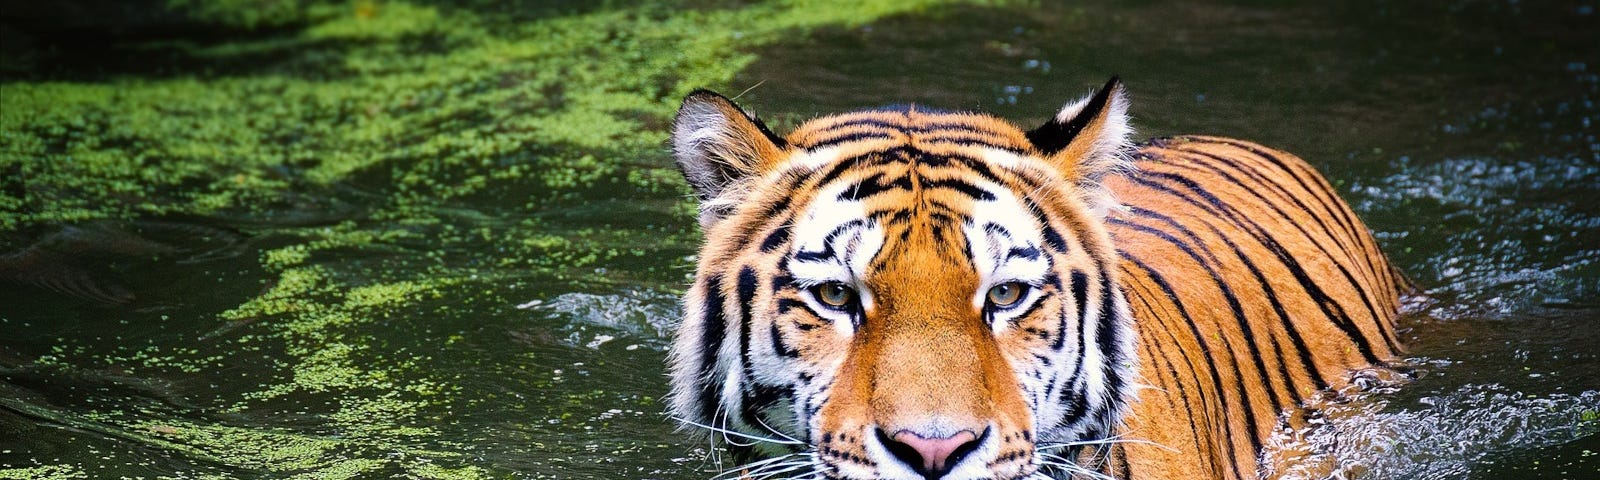 A Bengali Tiger in a swamp with some algae floating.